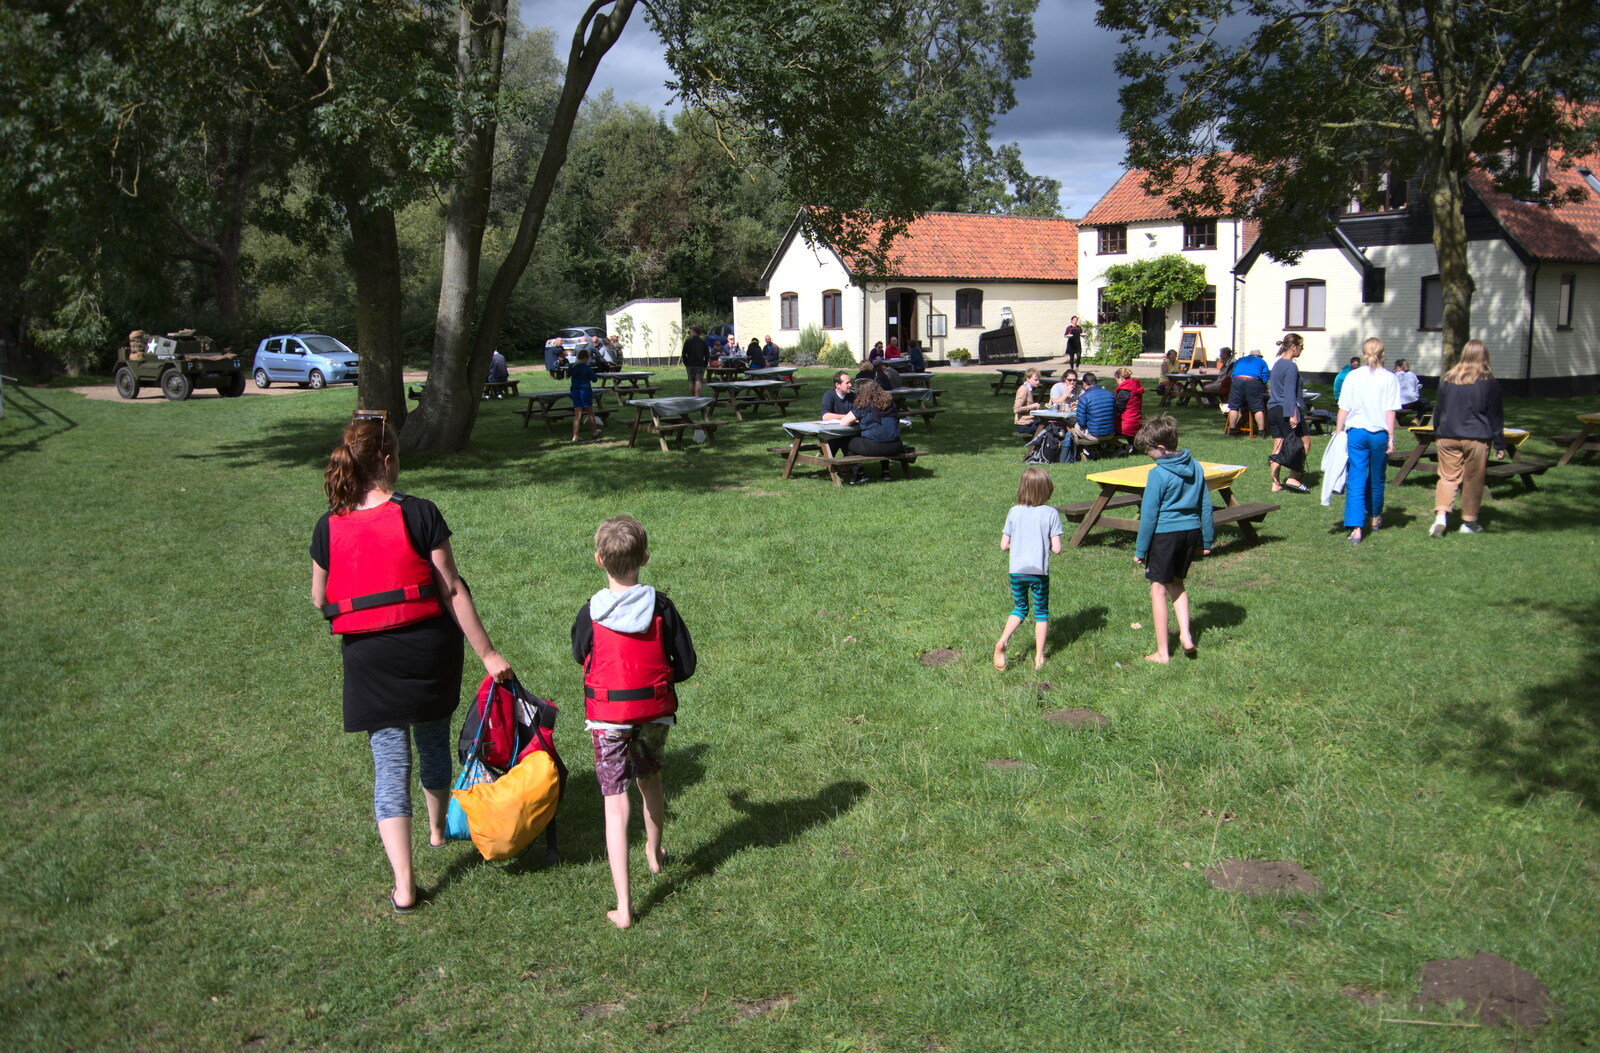 Camping at Three Rivers, Geldeston, Norfolk - 5th September 2020: It's time for pub